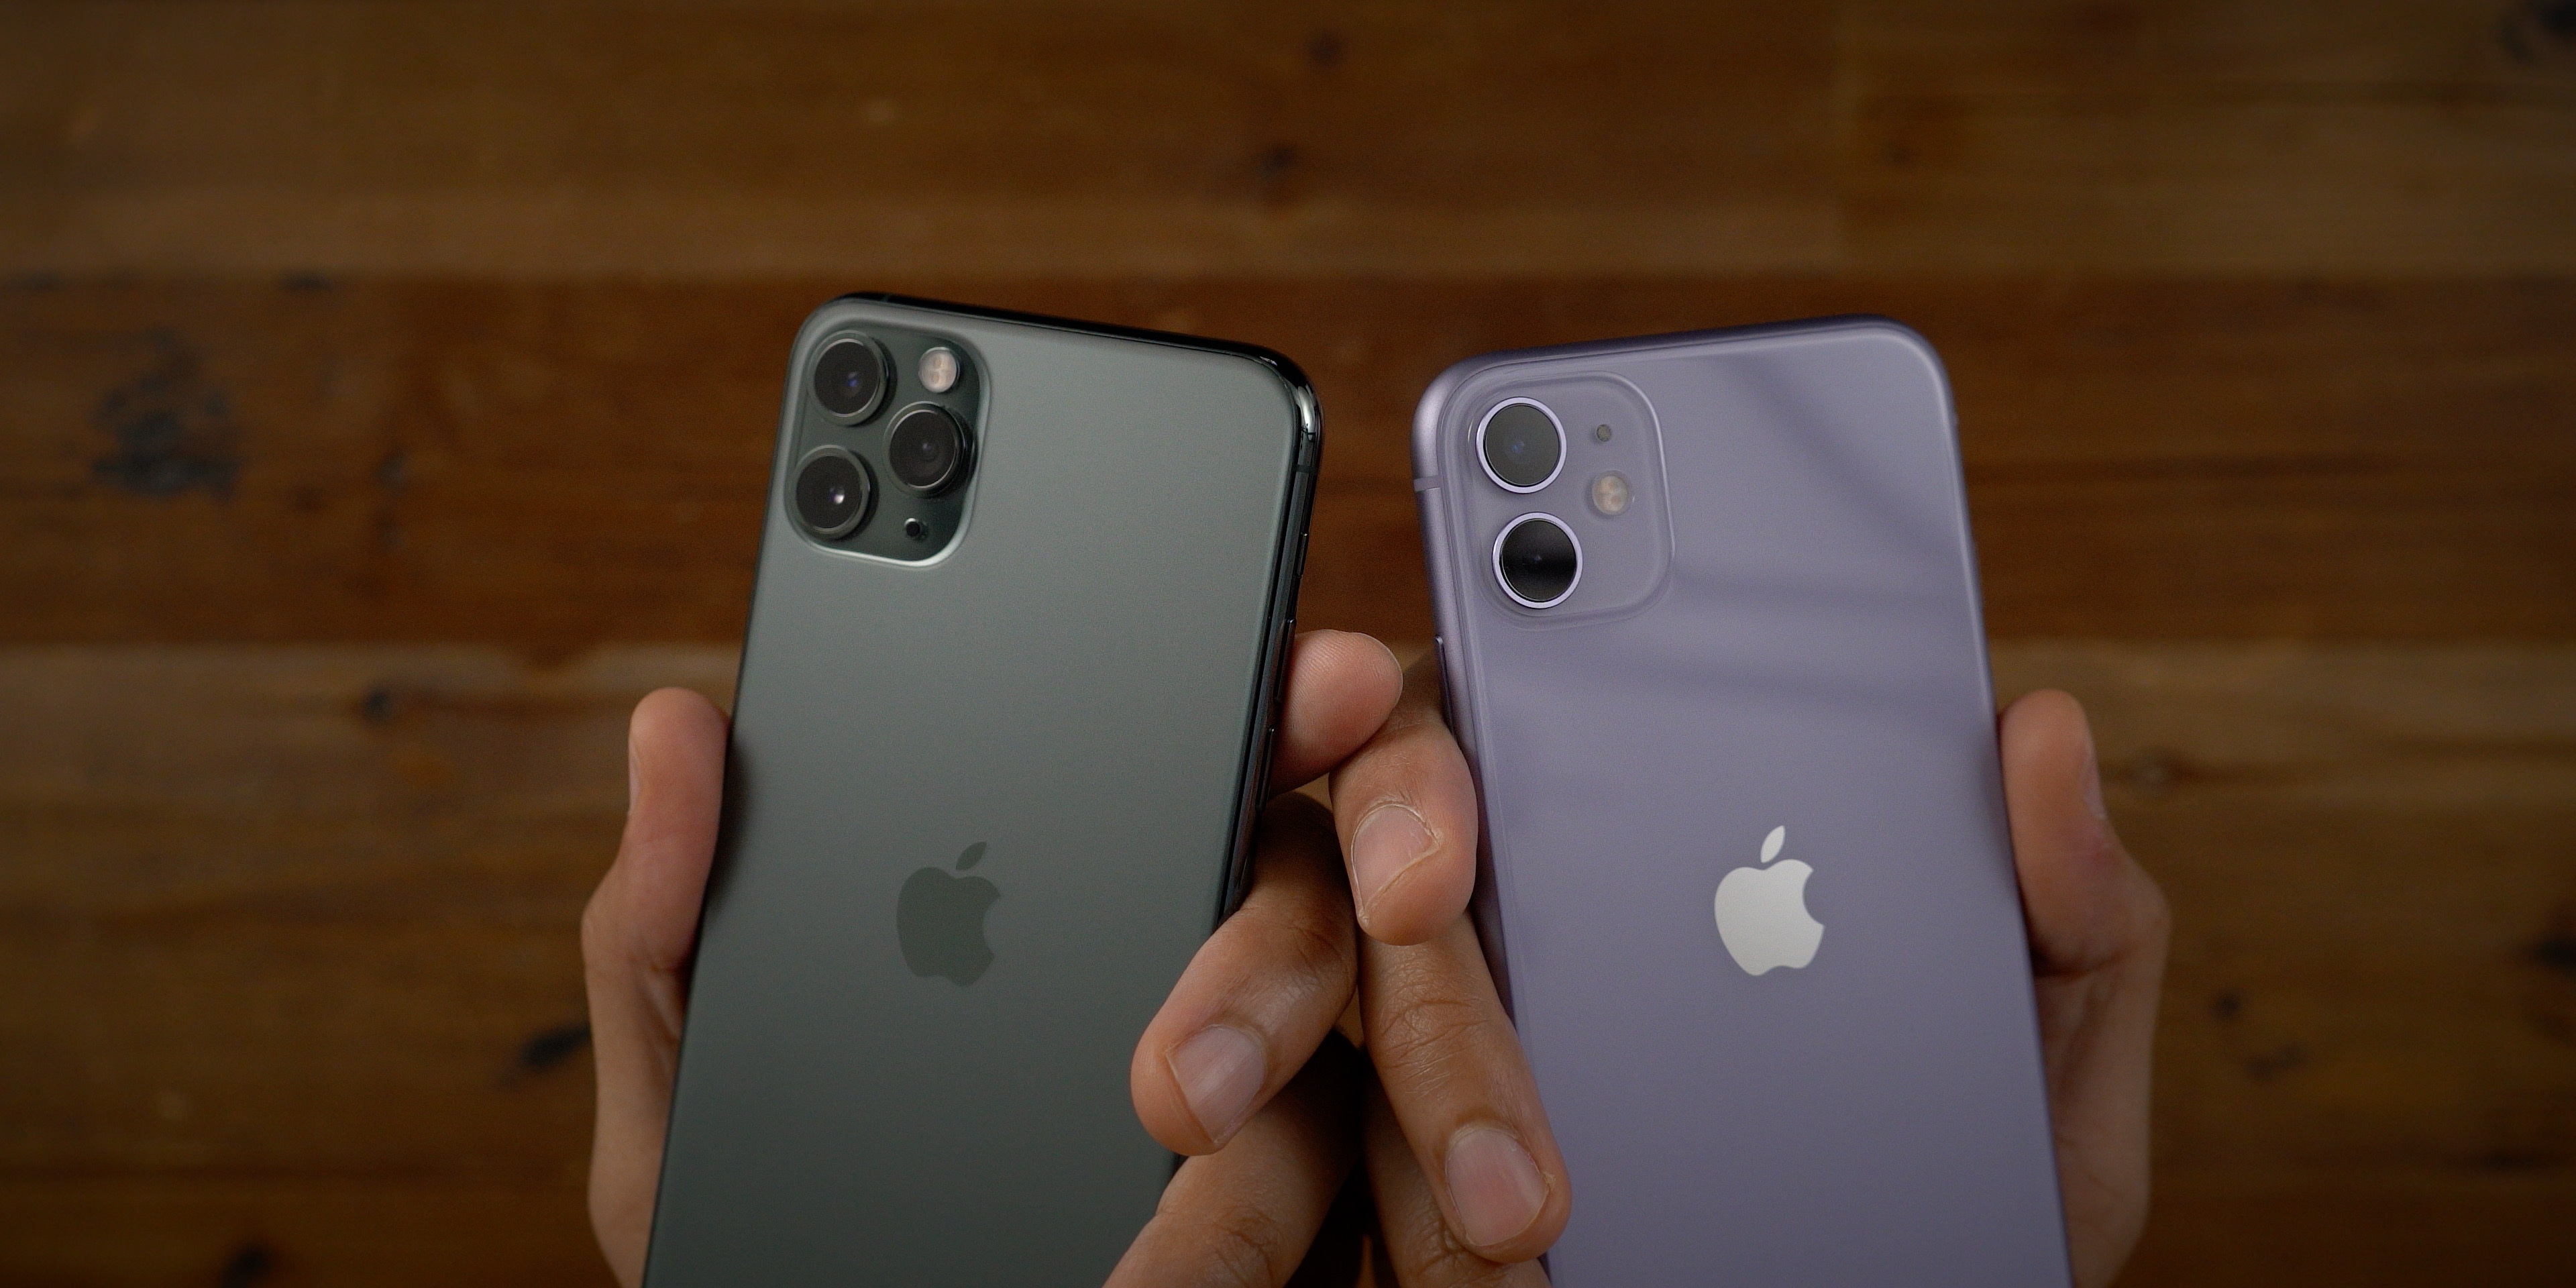 iPhone 11 Pro review: is it worth the significant price premium